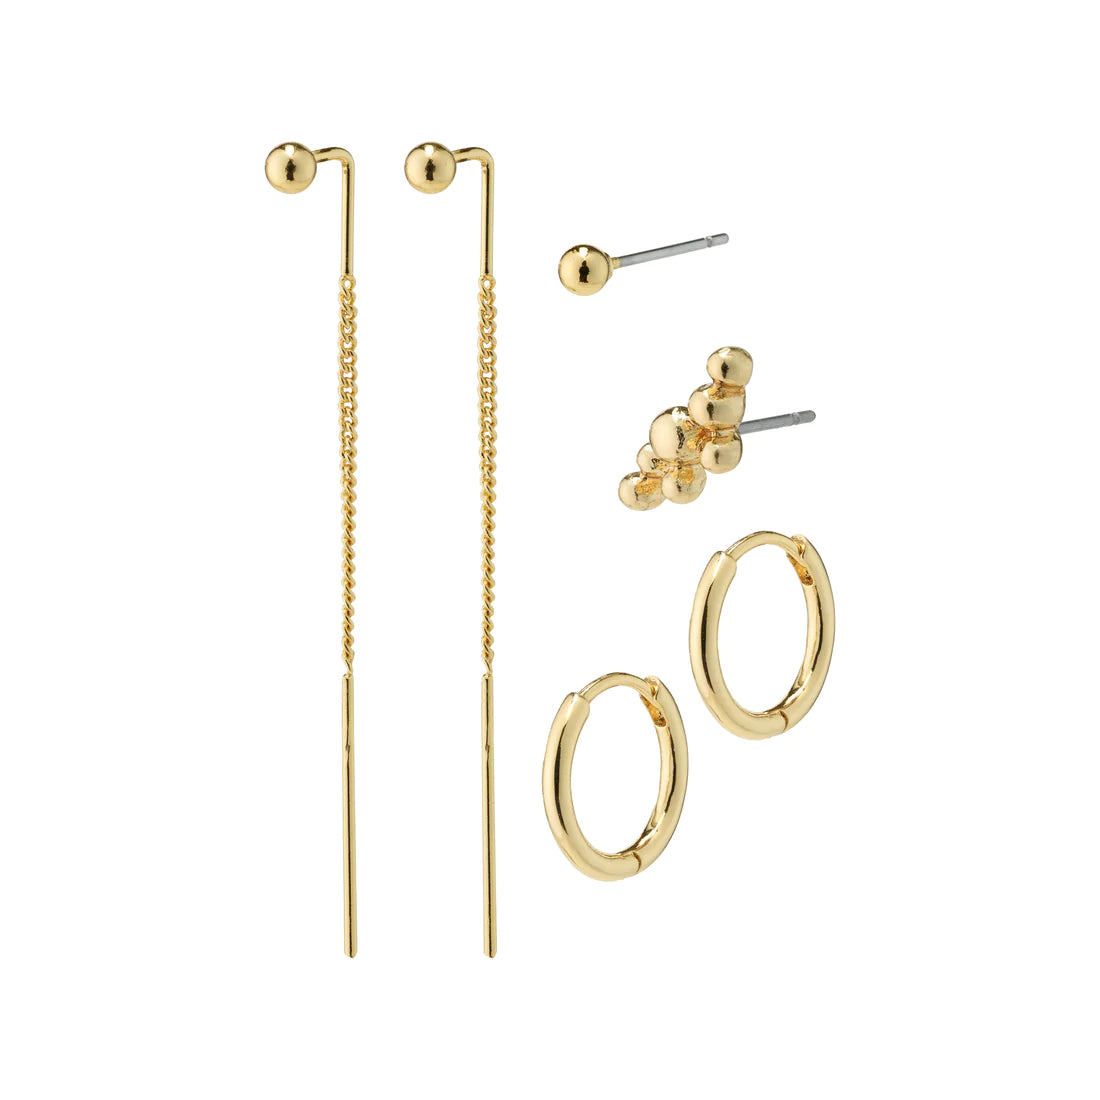 Siv earrings 4-in-1 set gold-plated